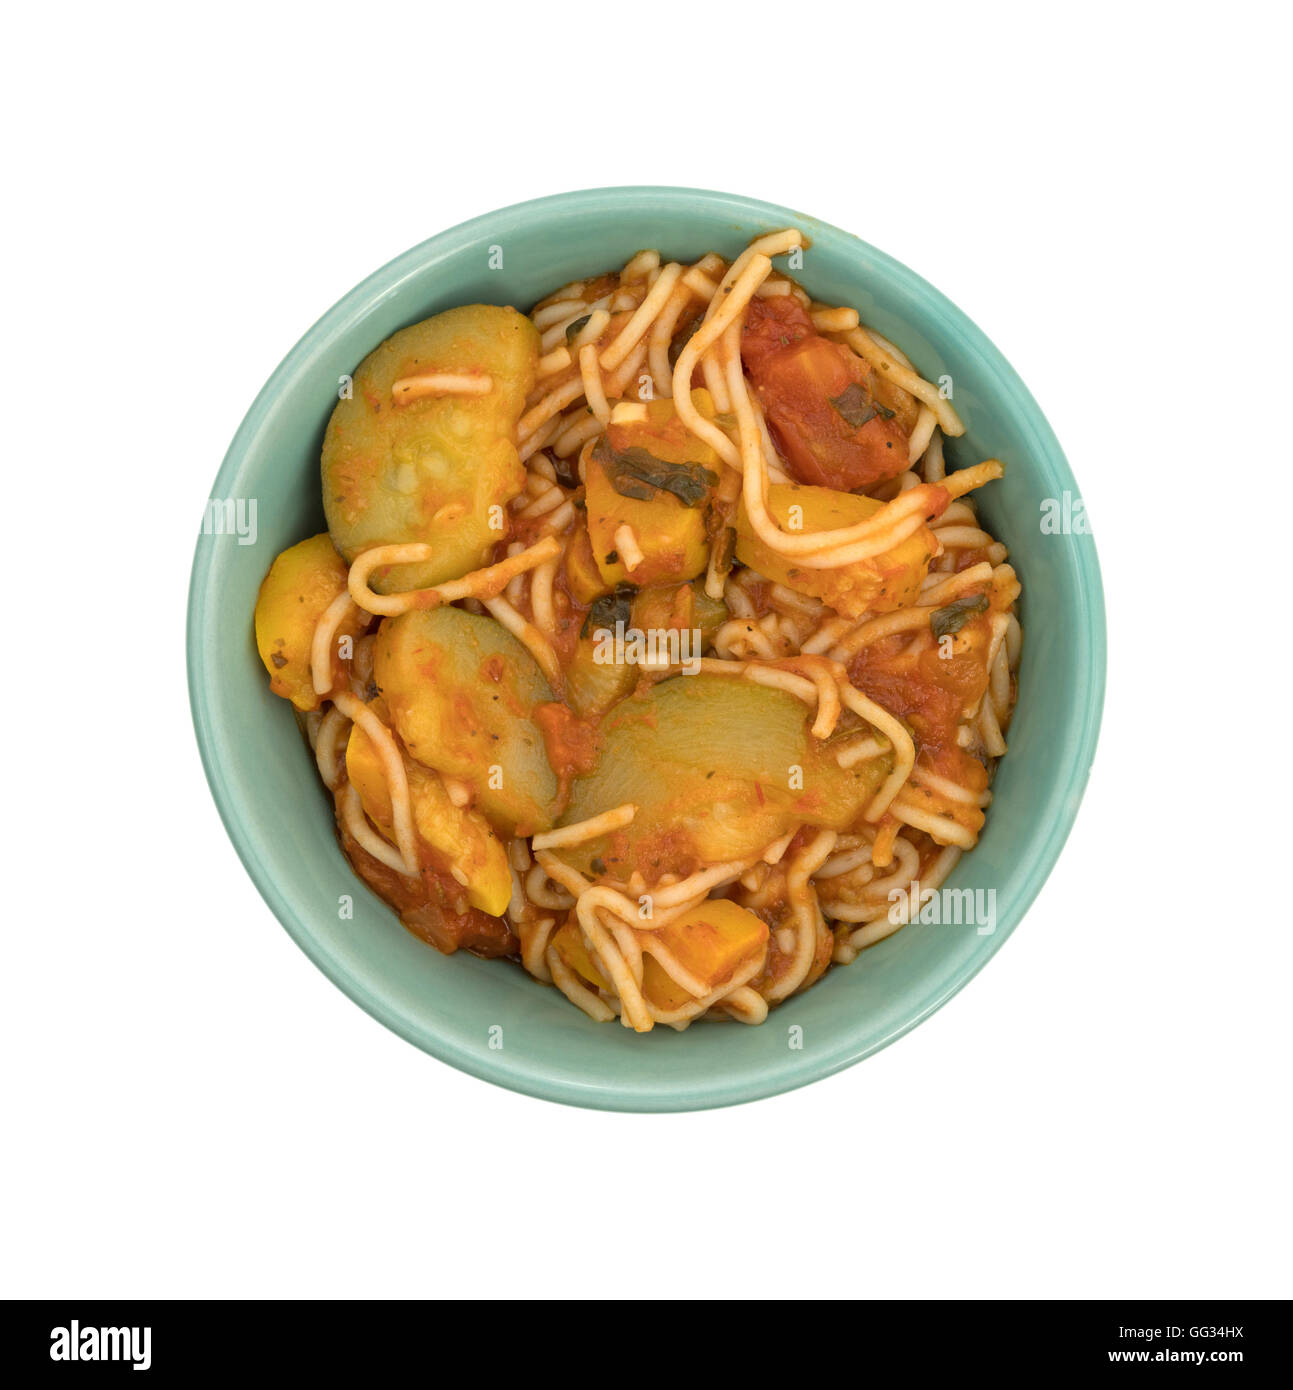 Top view of a TV dinner of angel hair pasta with zucchini and spinach in a small green bowl on a white background. Stock Photo